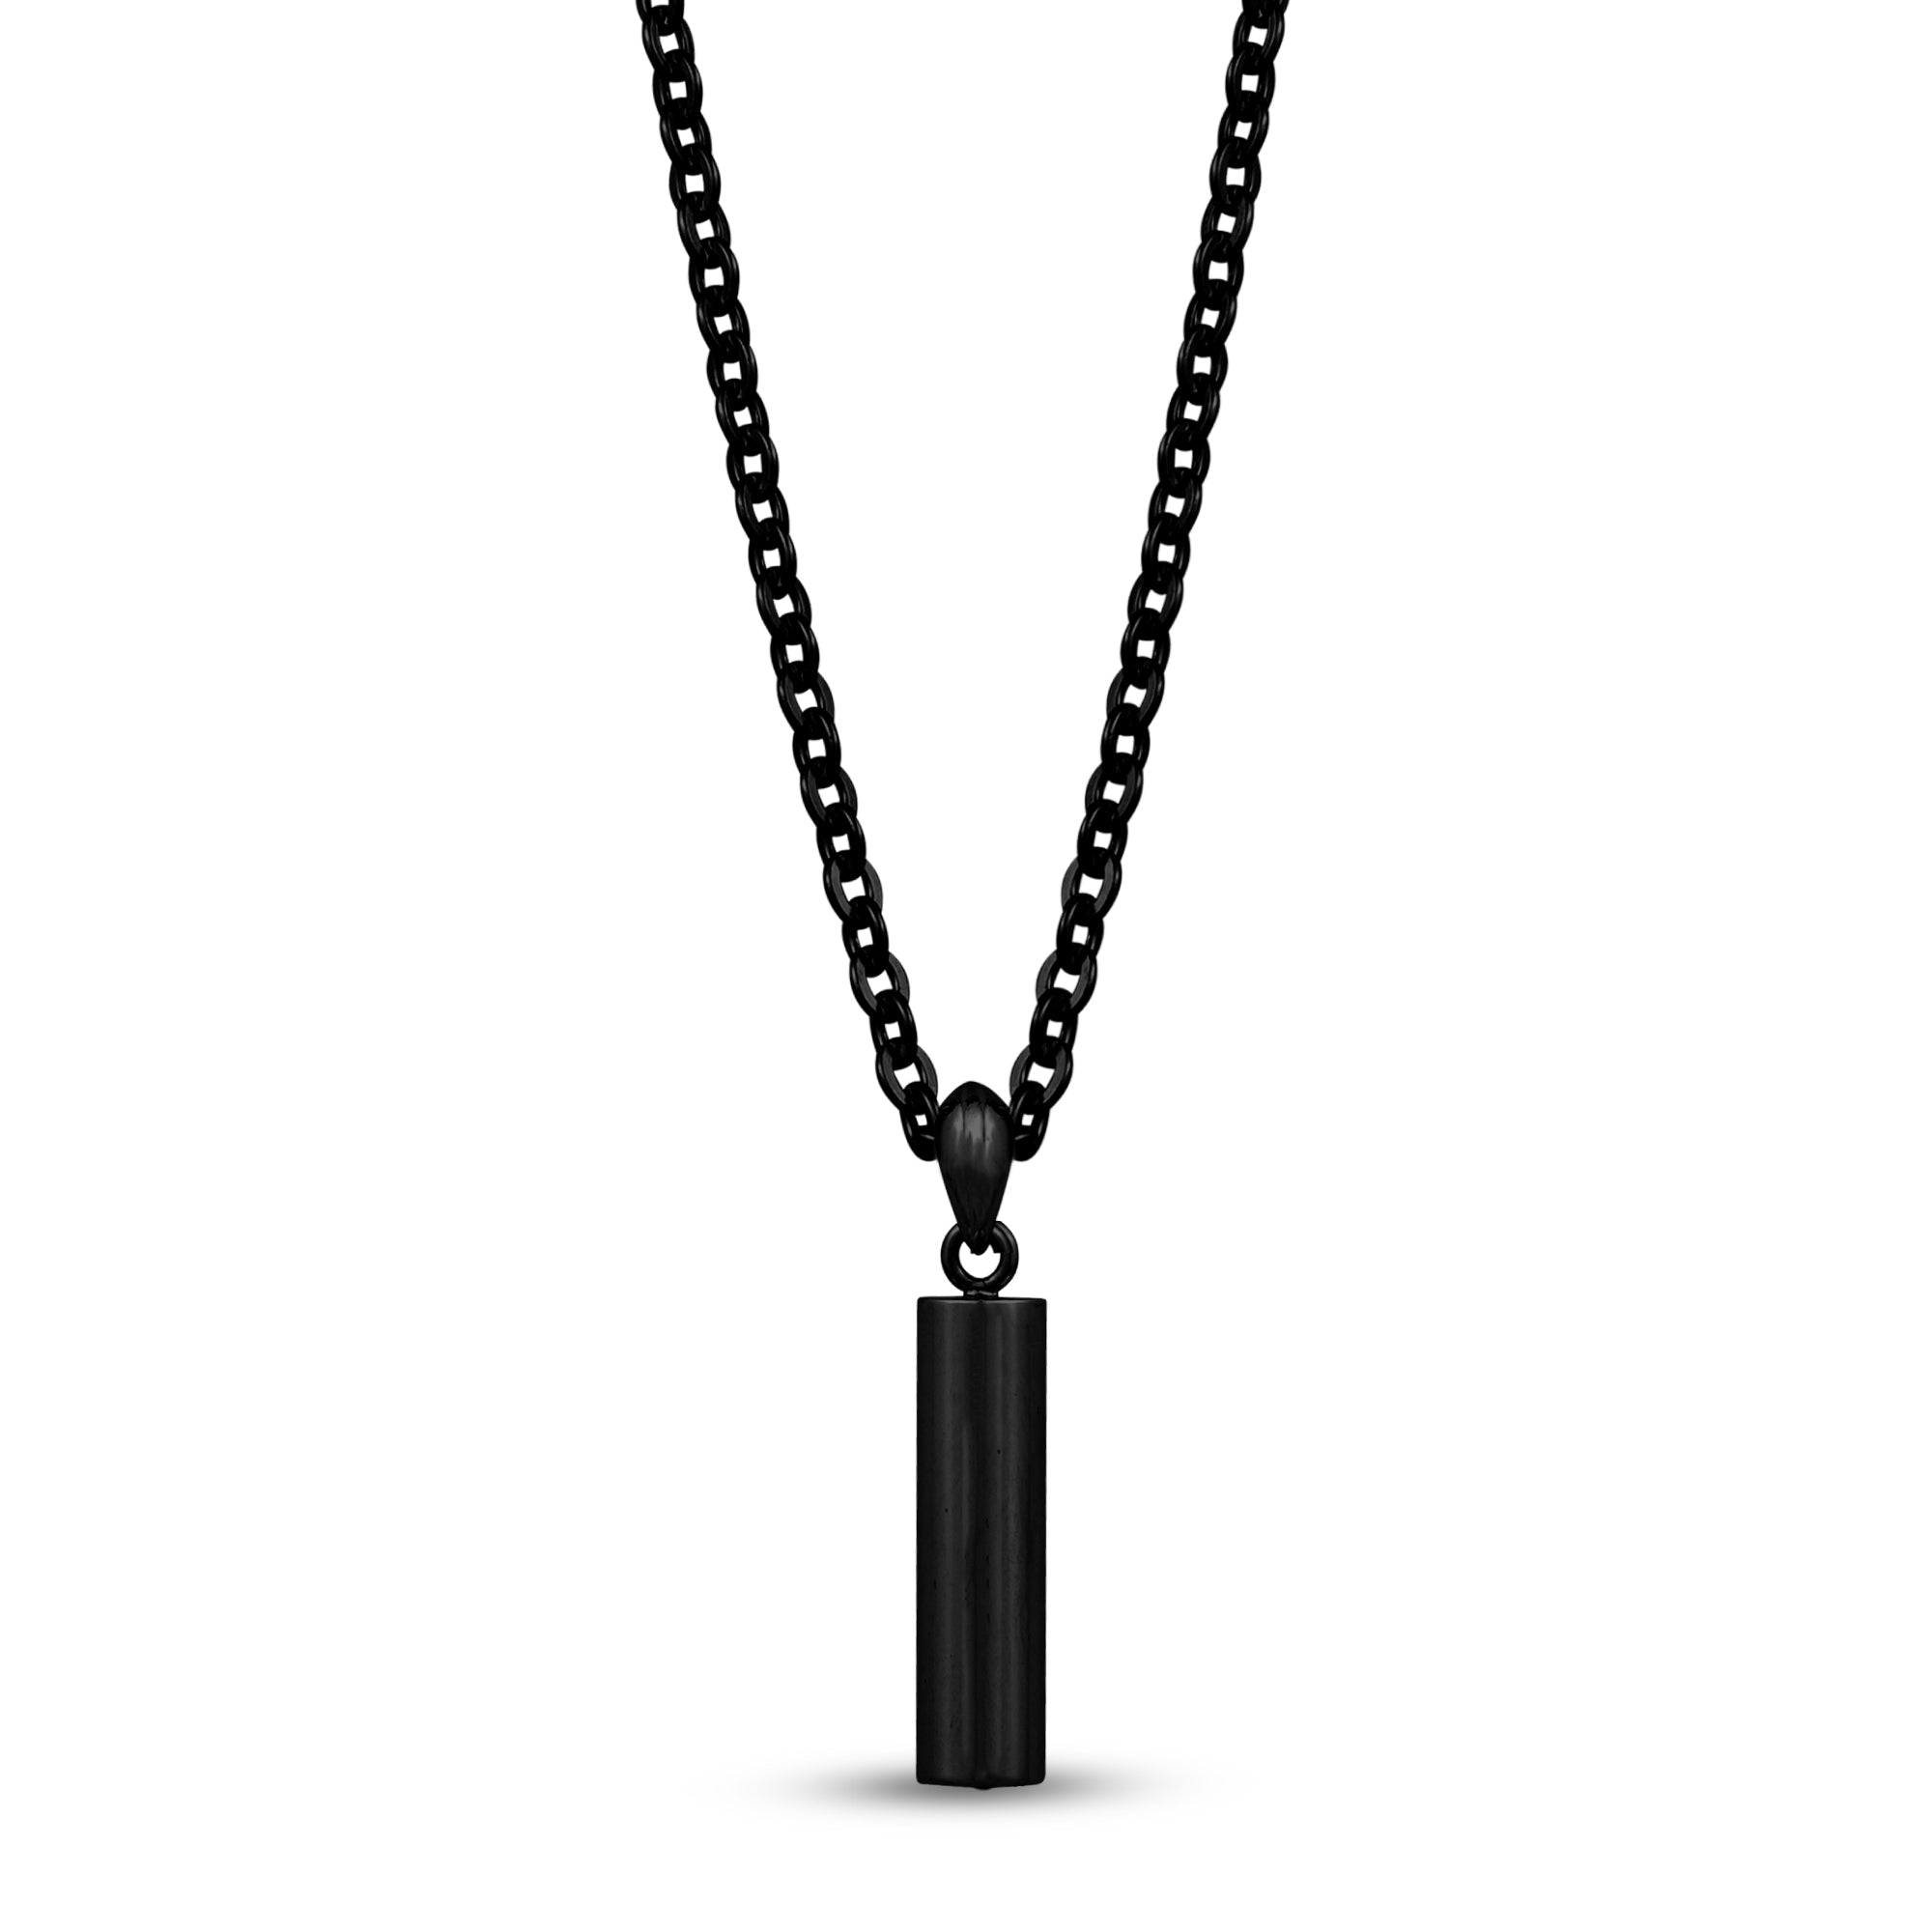 Stainless Steel Bar Calcified Bar Pendant Necklace Mens For Remembrance Of  Your Family Or Pet Available In Gold, Silver, And Black From Weikuijewelry,  $2.01 | DHgate.Com